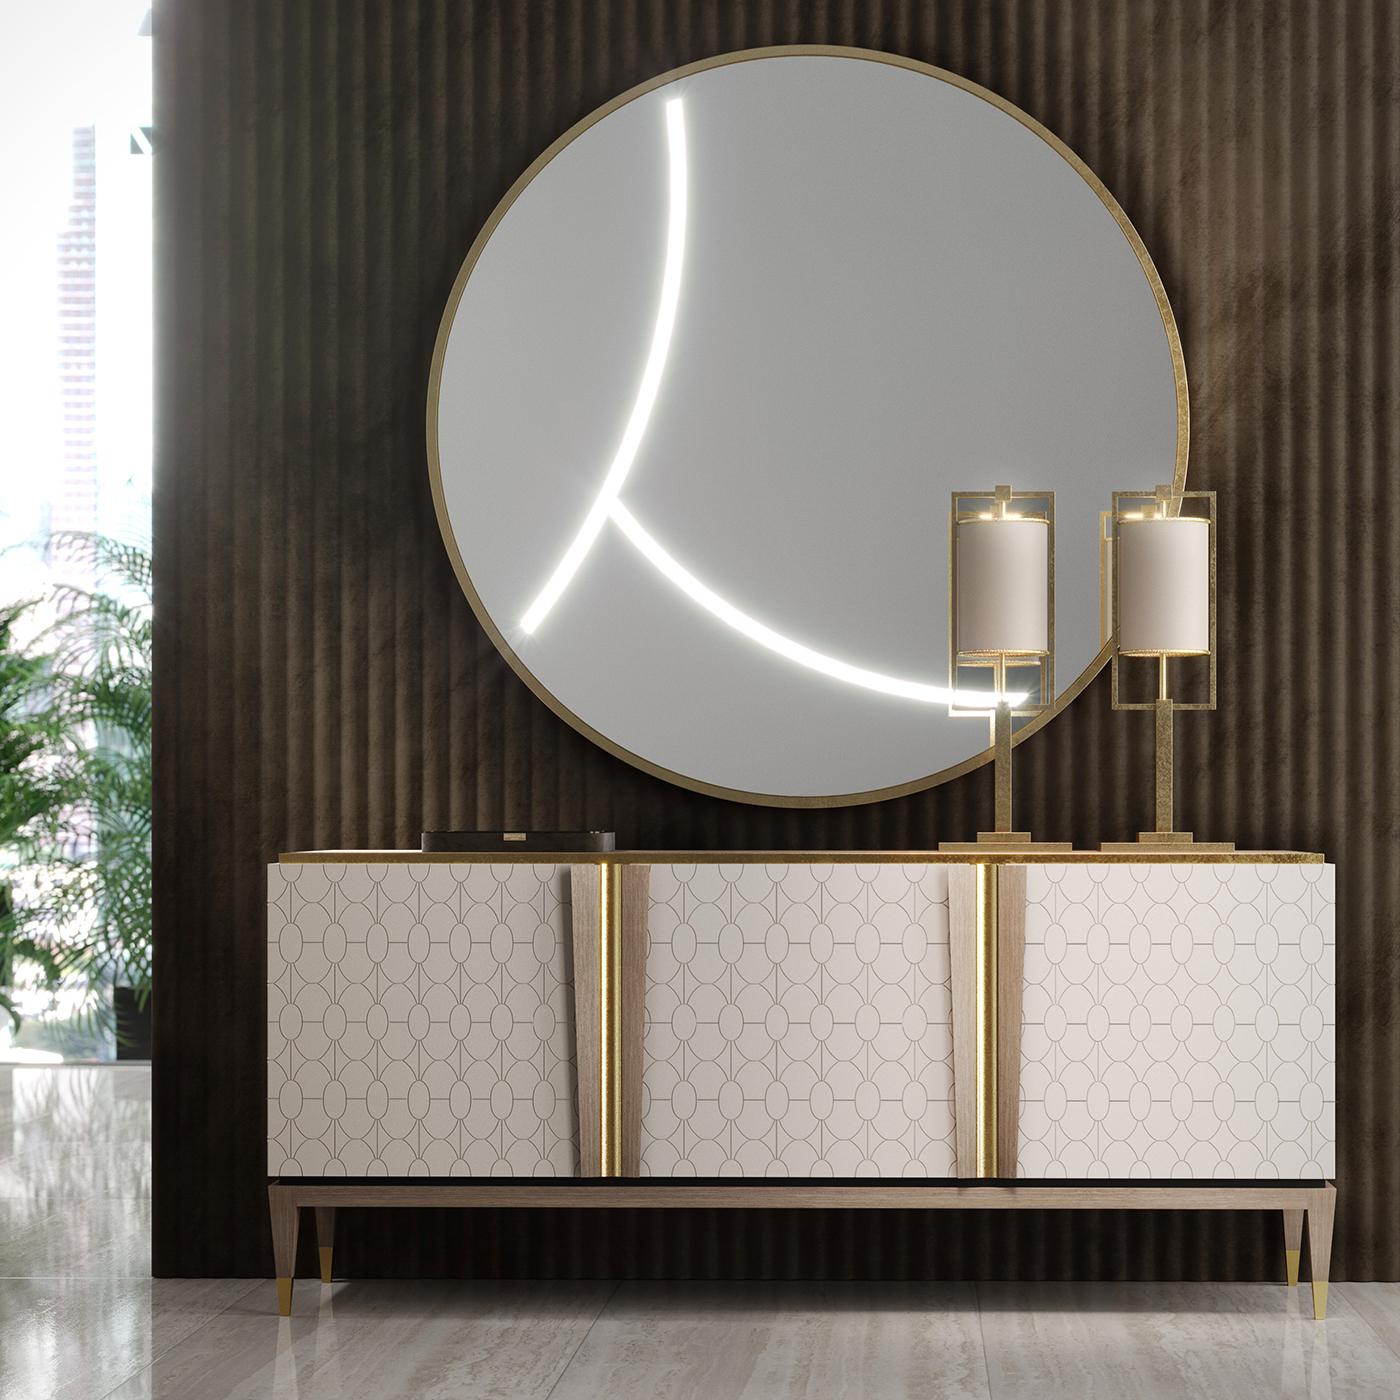 The Minimalist profile of this elegant round mirror is part of the Mascari Collection, distinctive for its linear silhouettes and precious finishes. The frame boasts an MDF California Air Resources Board (CARB) frame with a metallic gold finish. The